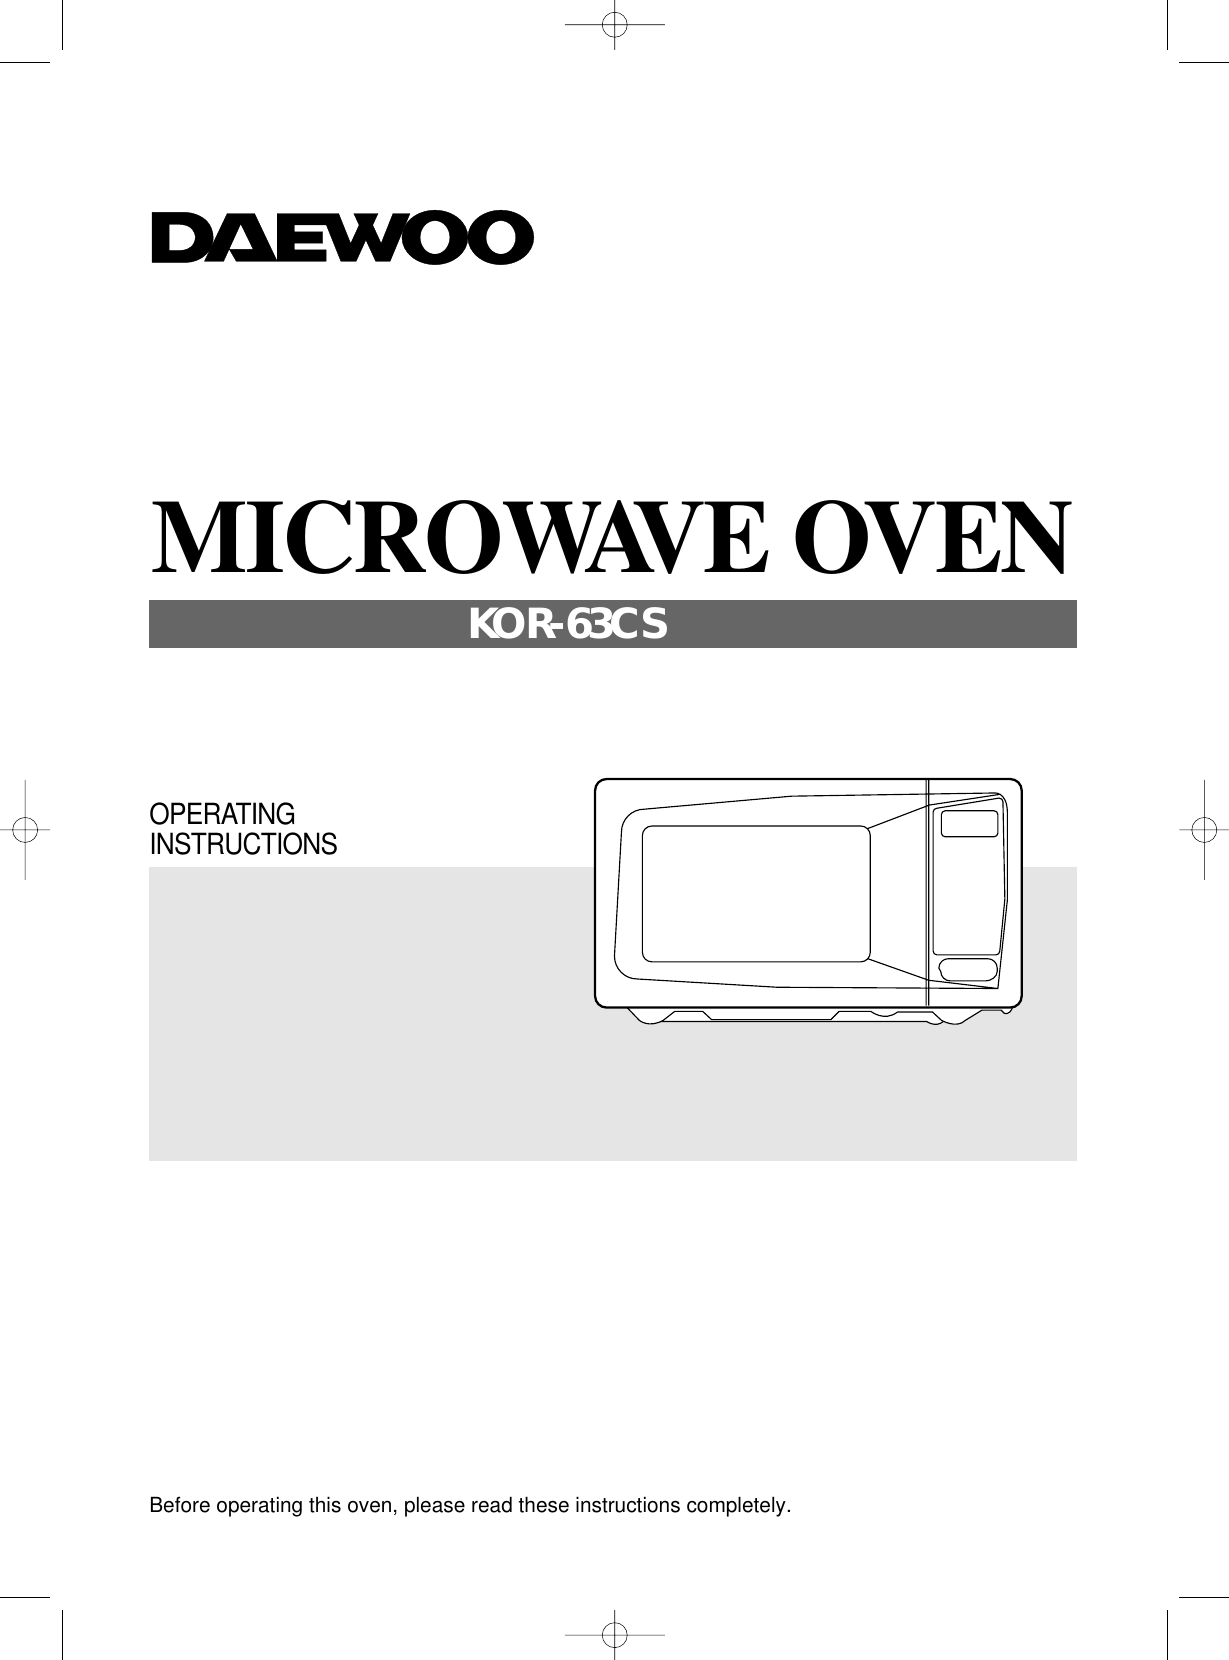 Before operating this oven, please read these instructions completely.OPERATINGINSTRUCTIONSMICROWAVE OVENKOR-63CS